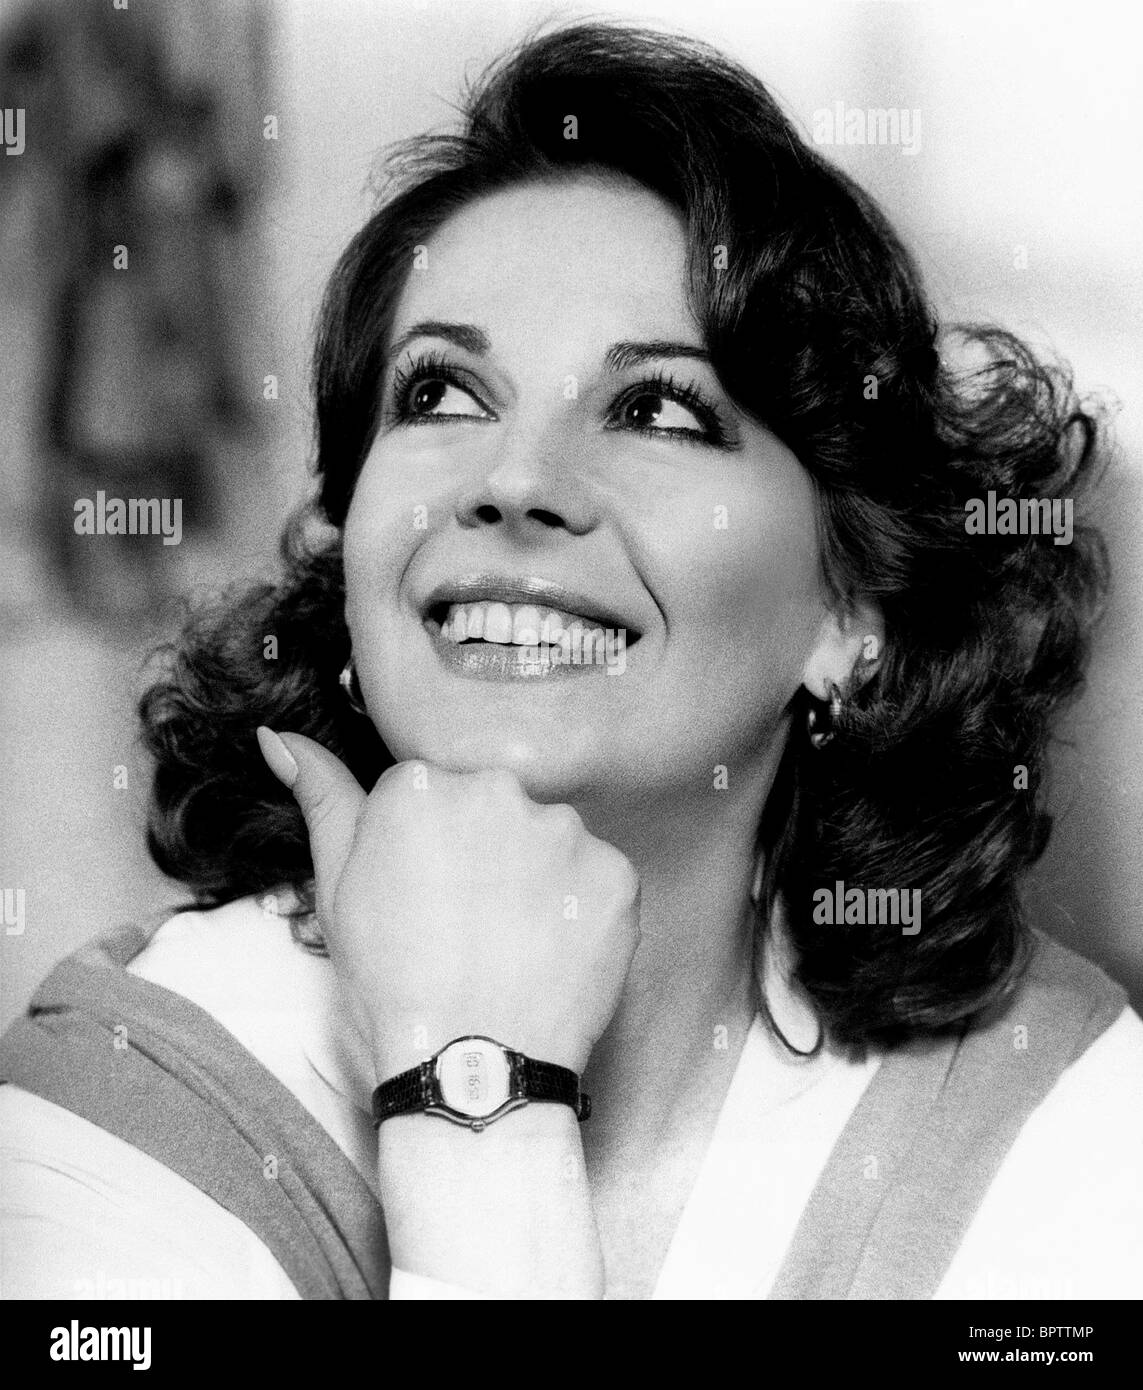 Natalie Wood High Resolution Stock Photography and Images - Alamy